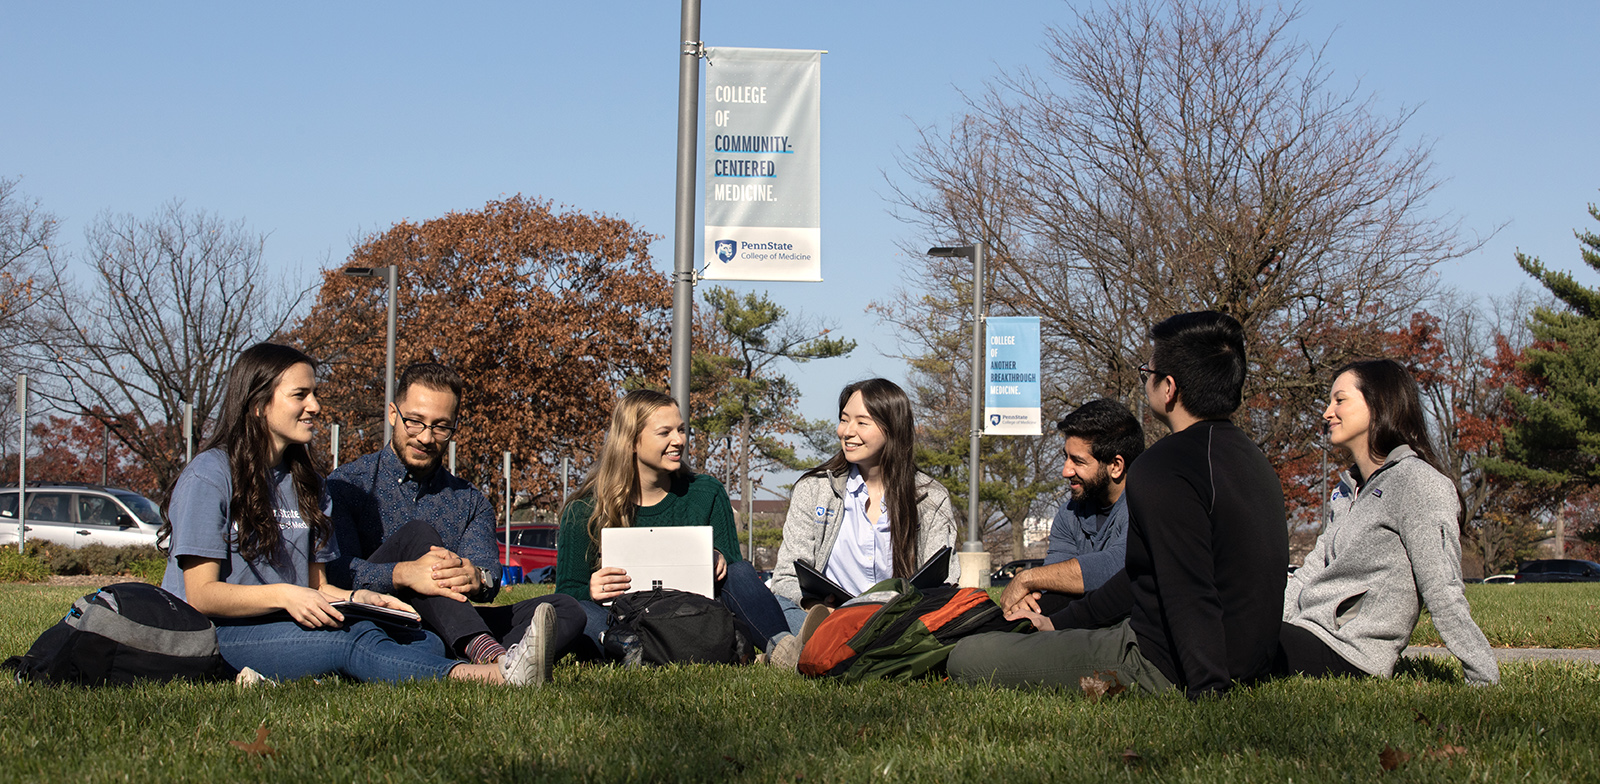 Seven students sit and talk with notebooks and backpacks on the grass outside the College of Medicine; a pole banner says 'College of Community-Centered Medicine'